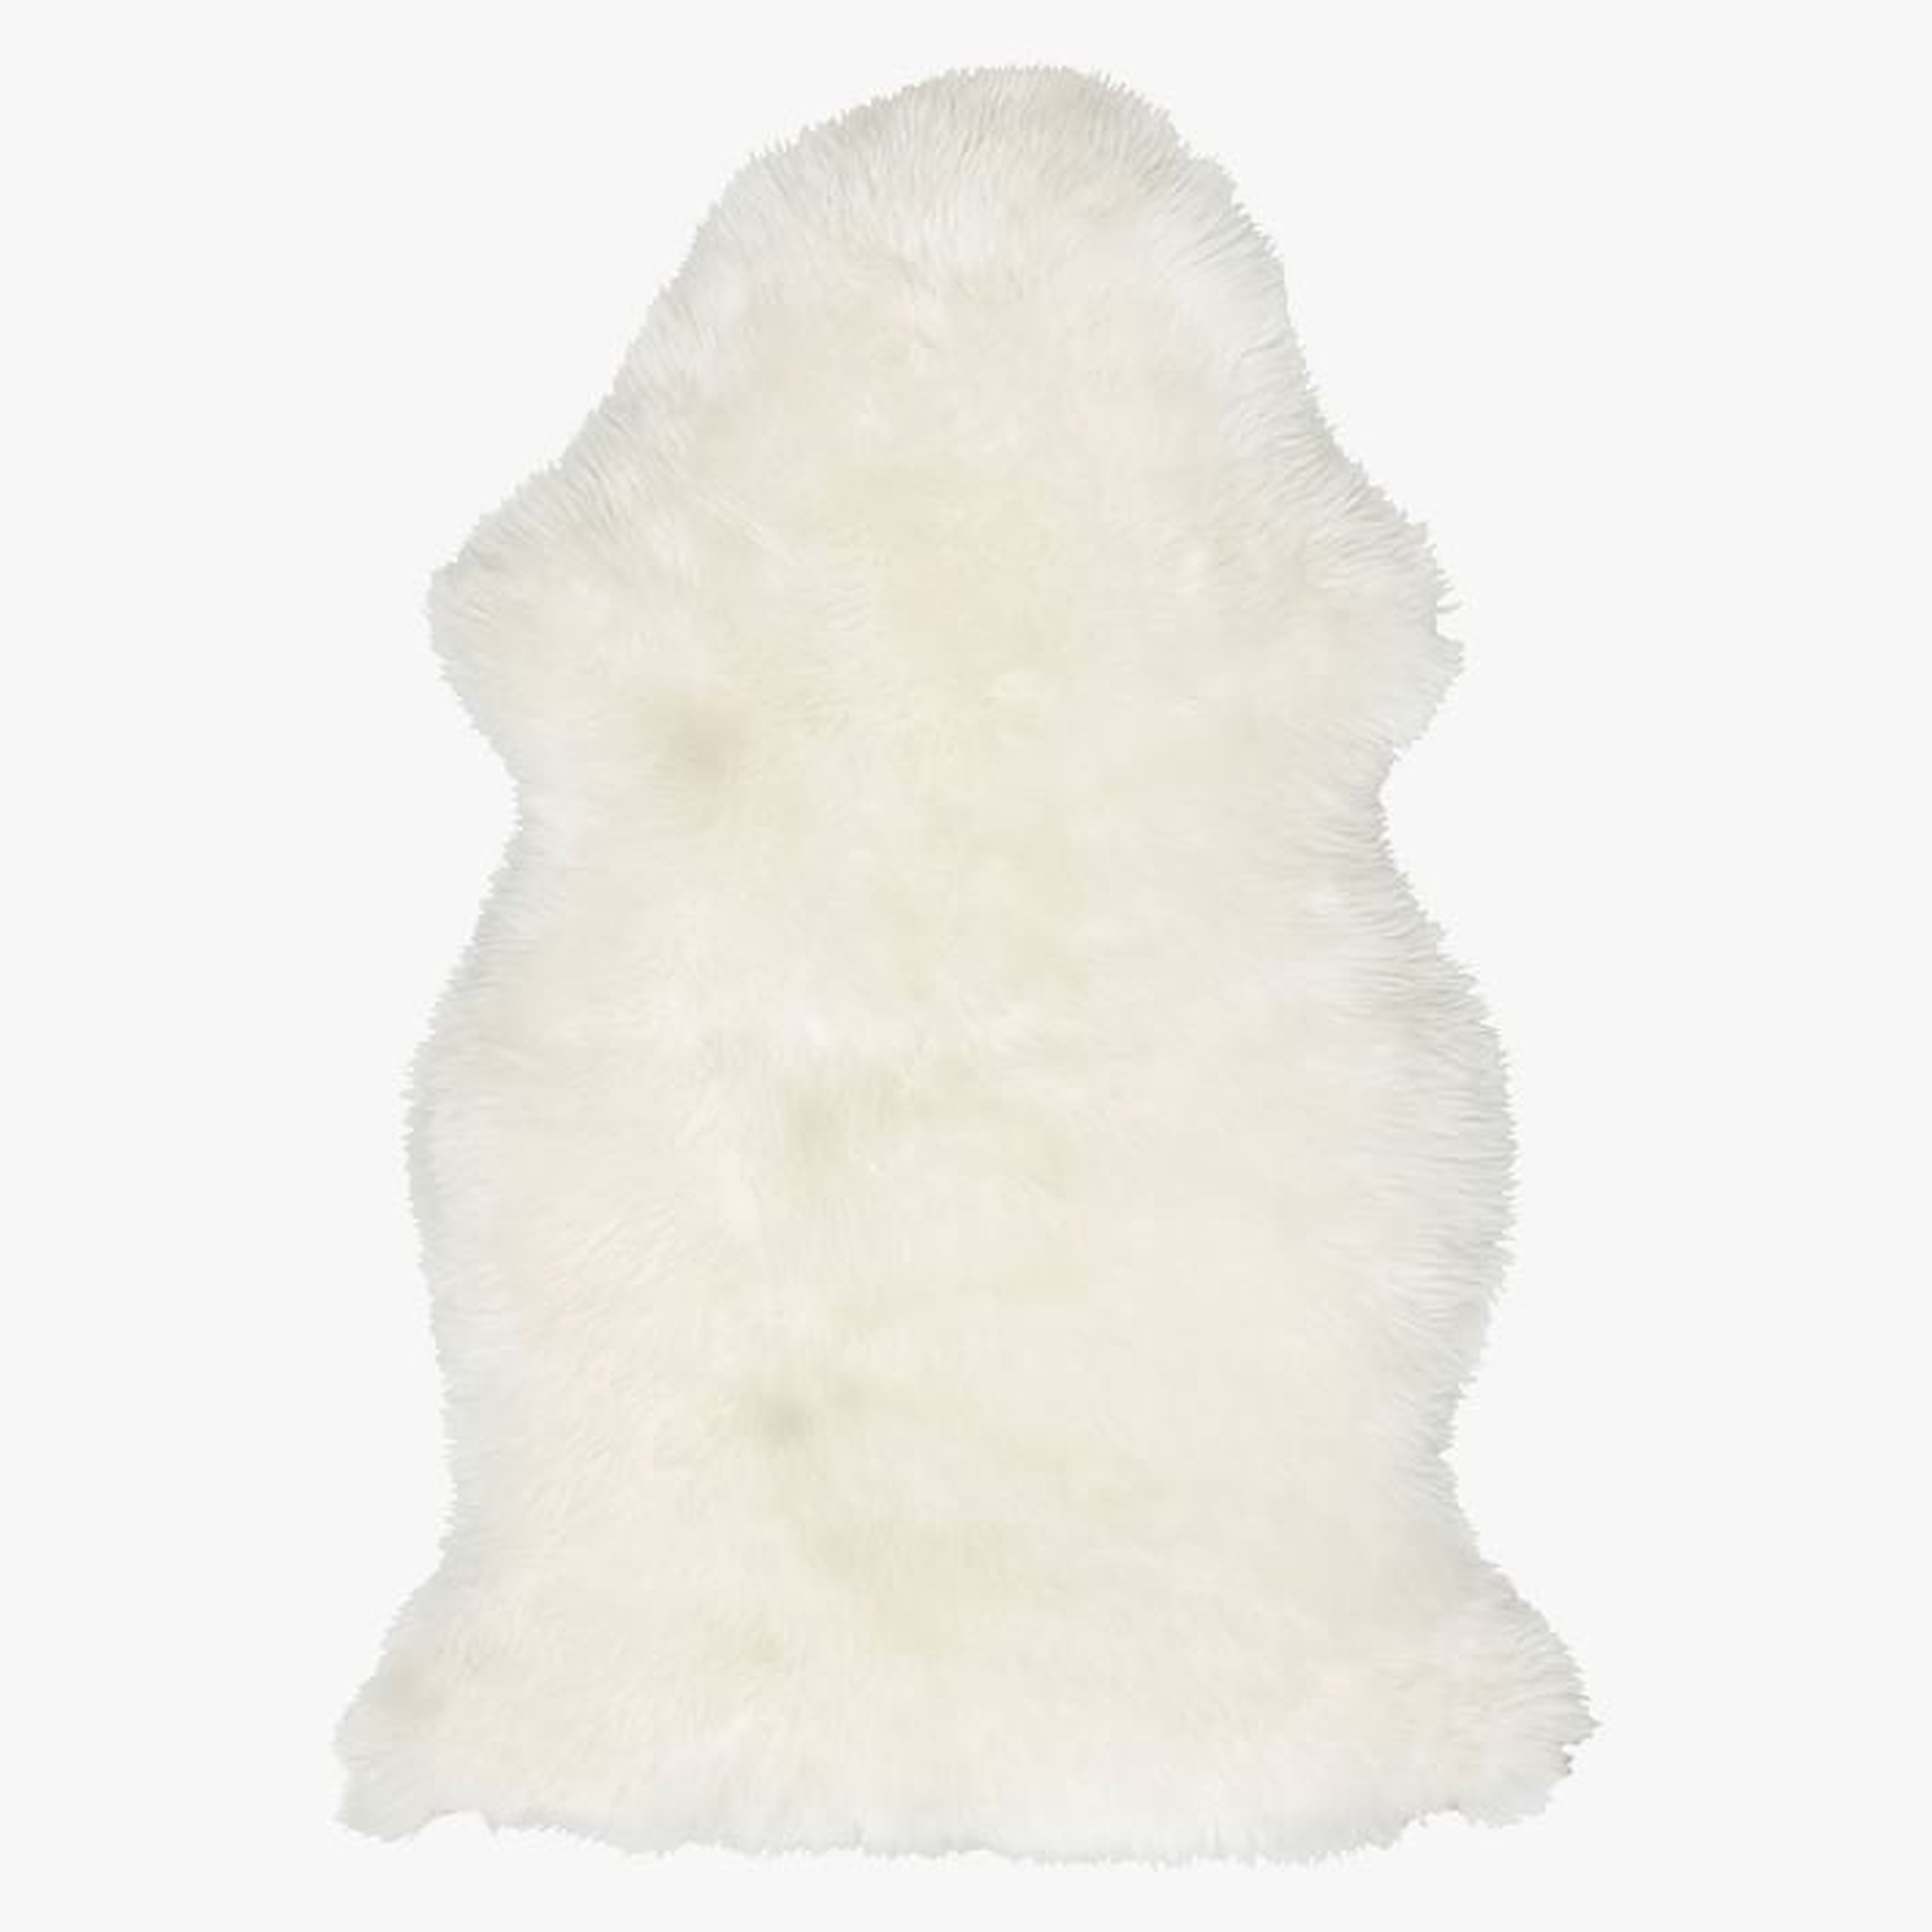 Supersoft Shearling Rug - Ivory - Pottery Barn Teen